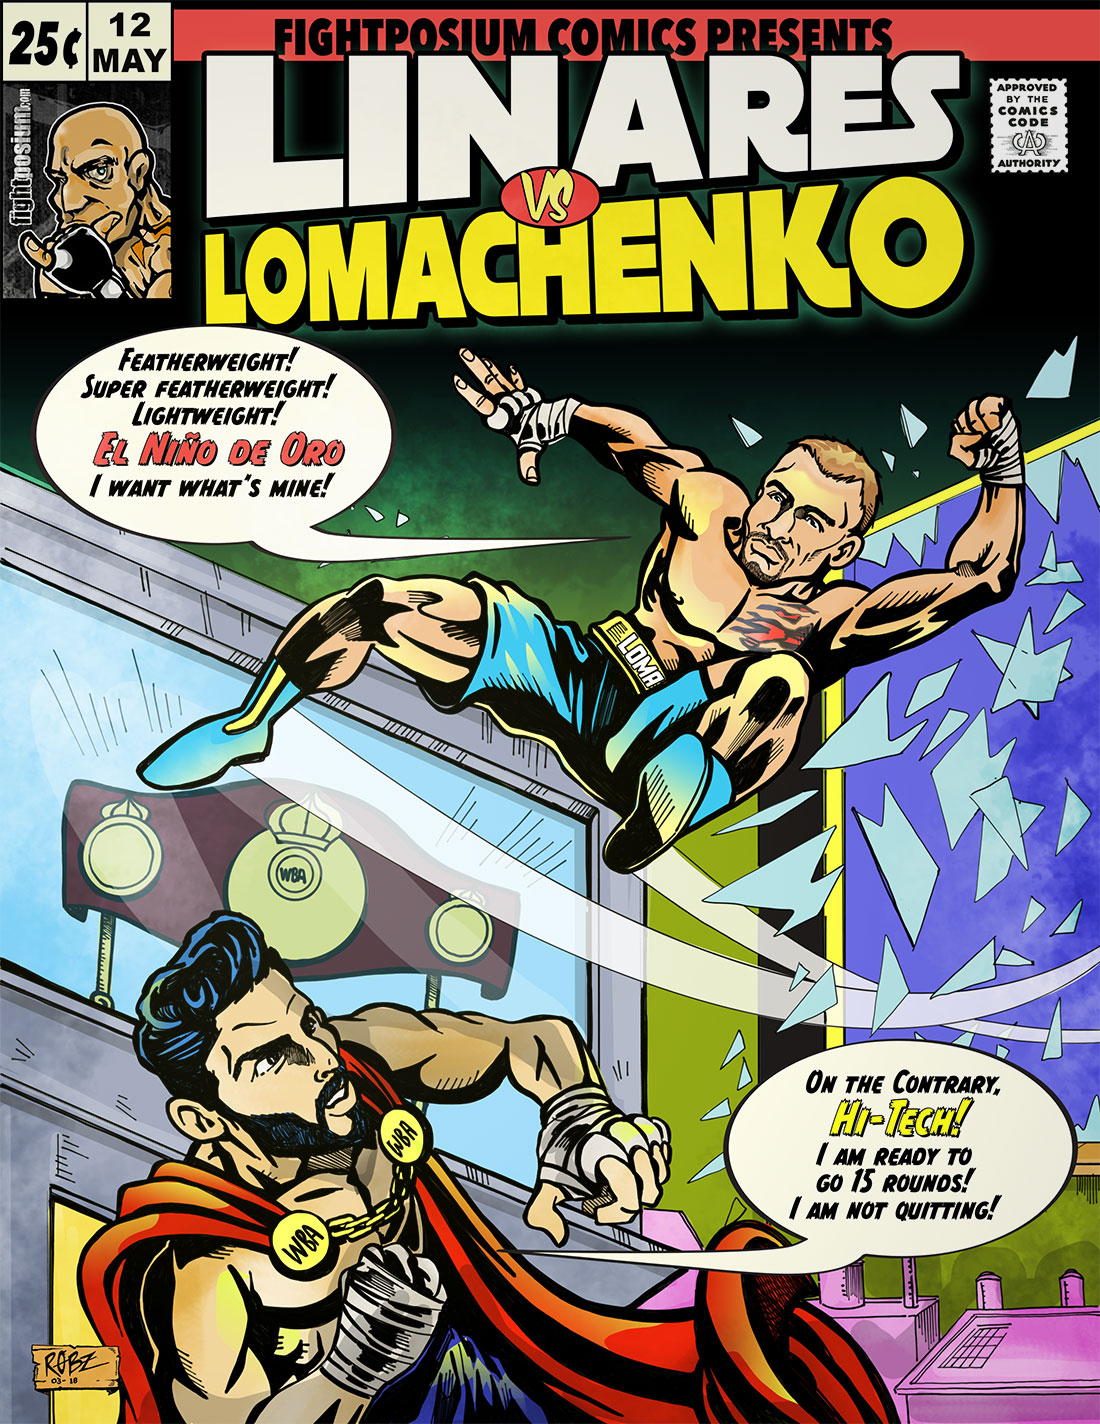 Read more about the article Linares vs Lomachenko – Hi-Tech vies to be a 3-div Champion!